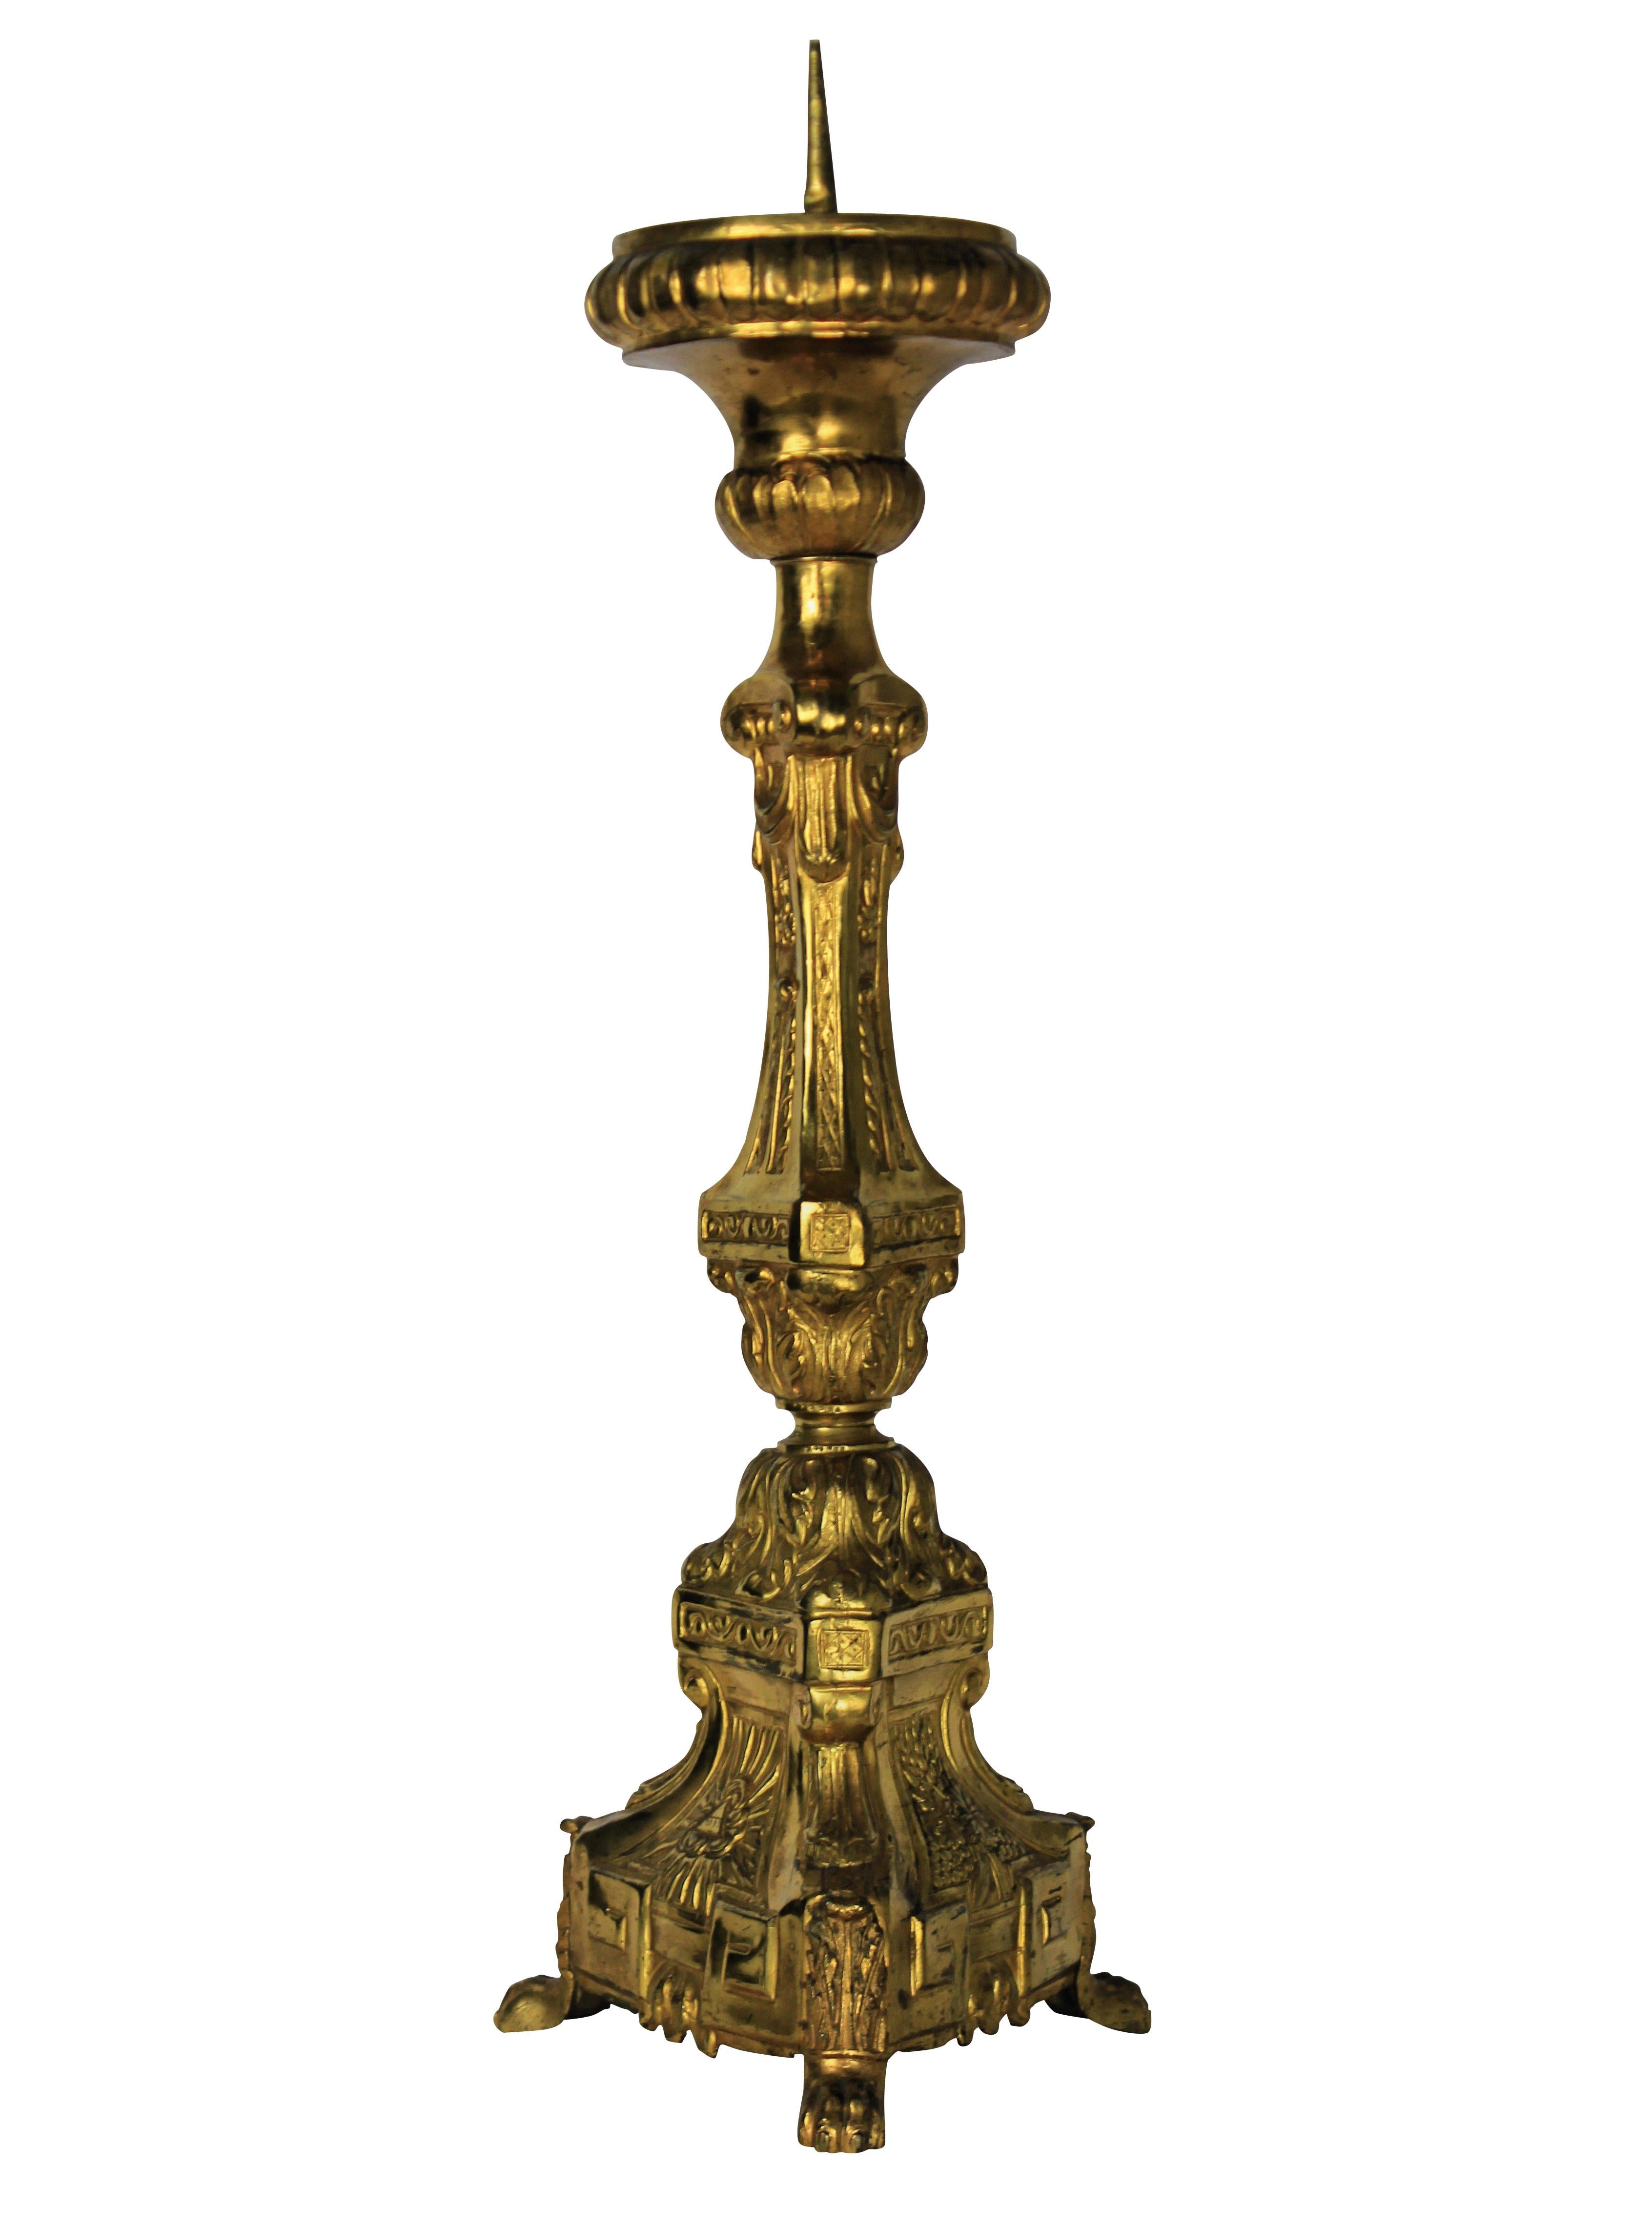 19th Century French Gold-Plated Metal Altarstick, circa 1860s